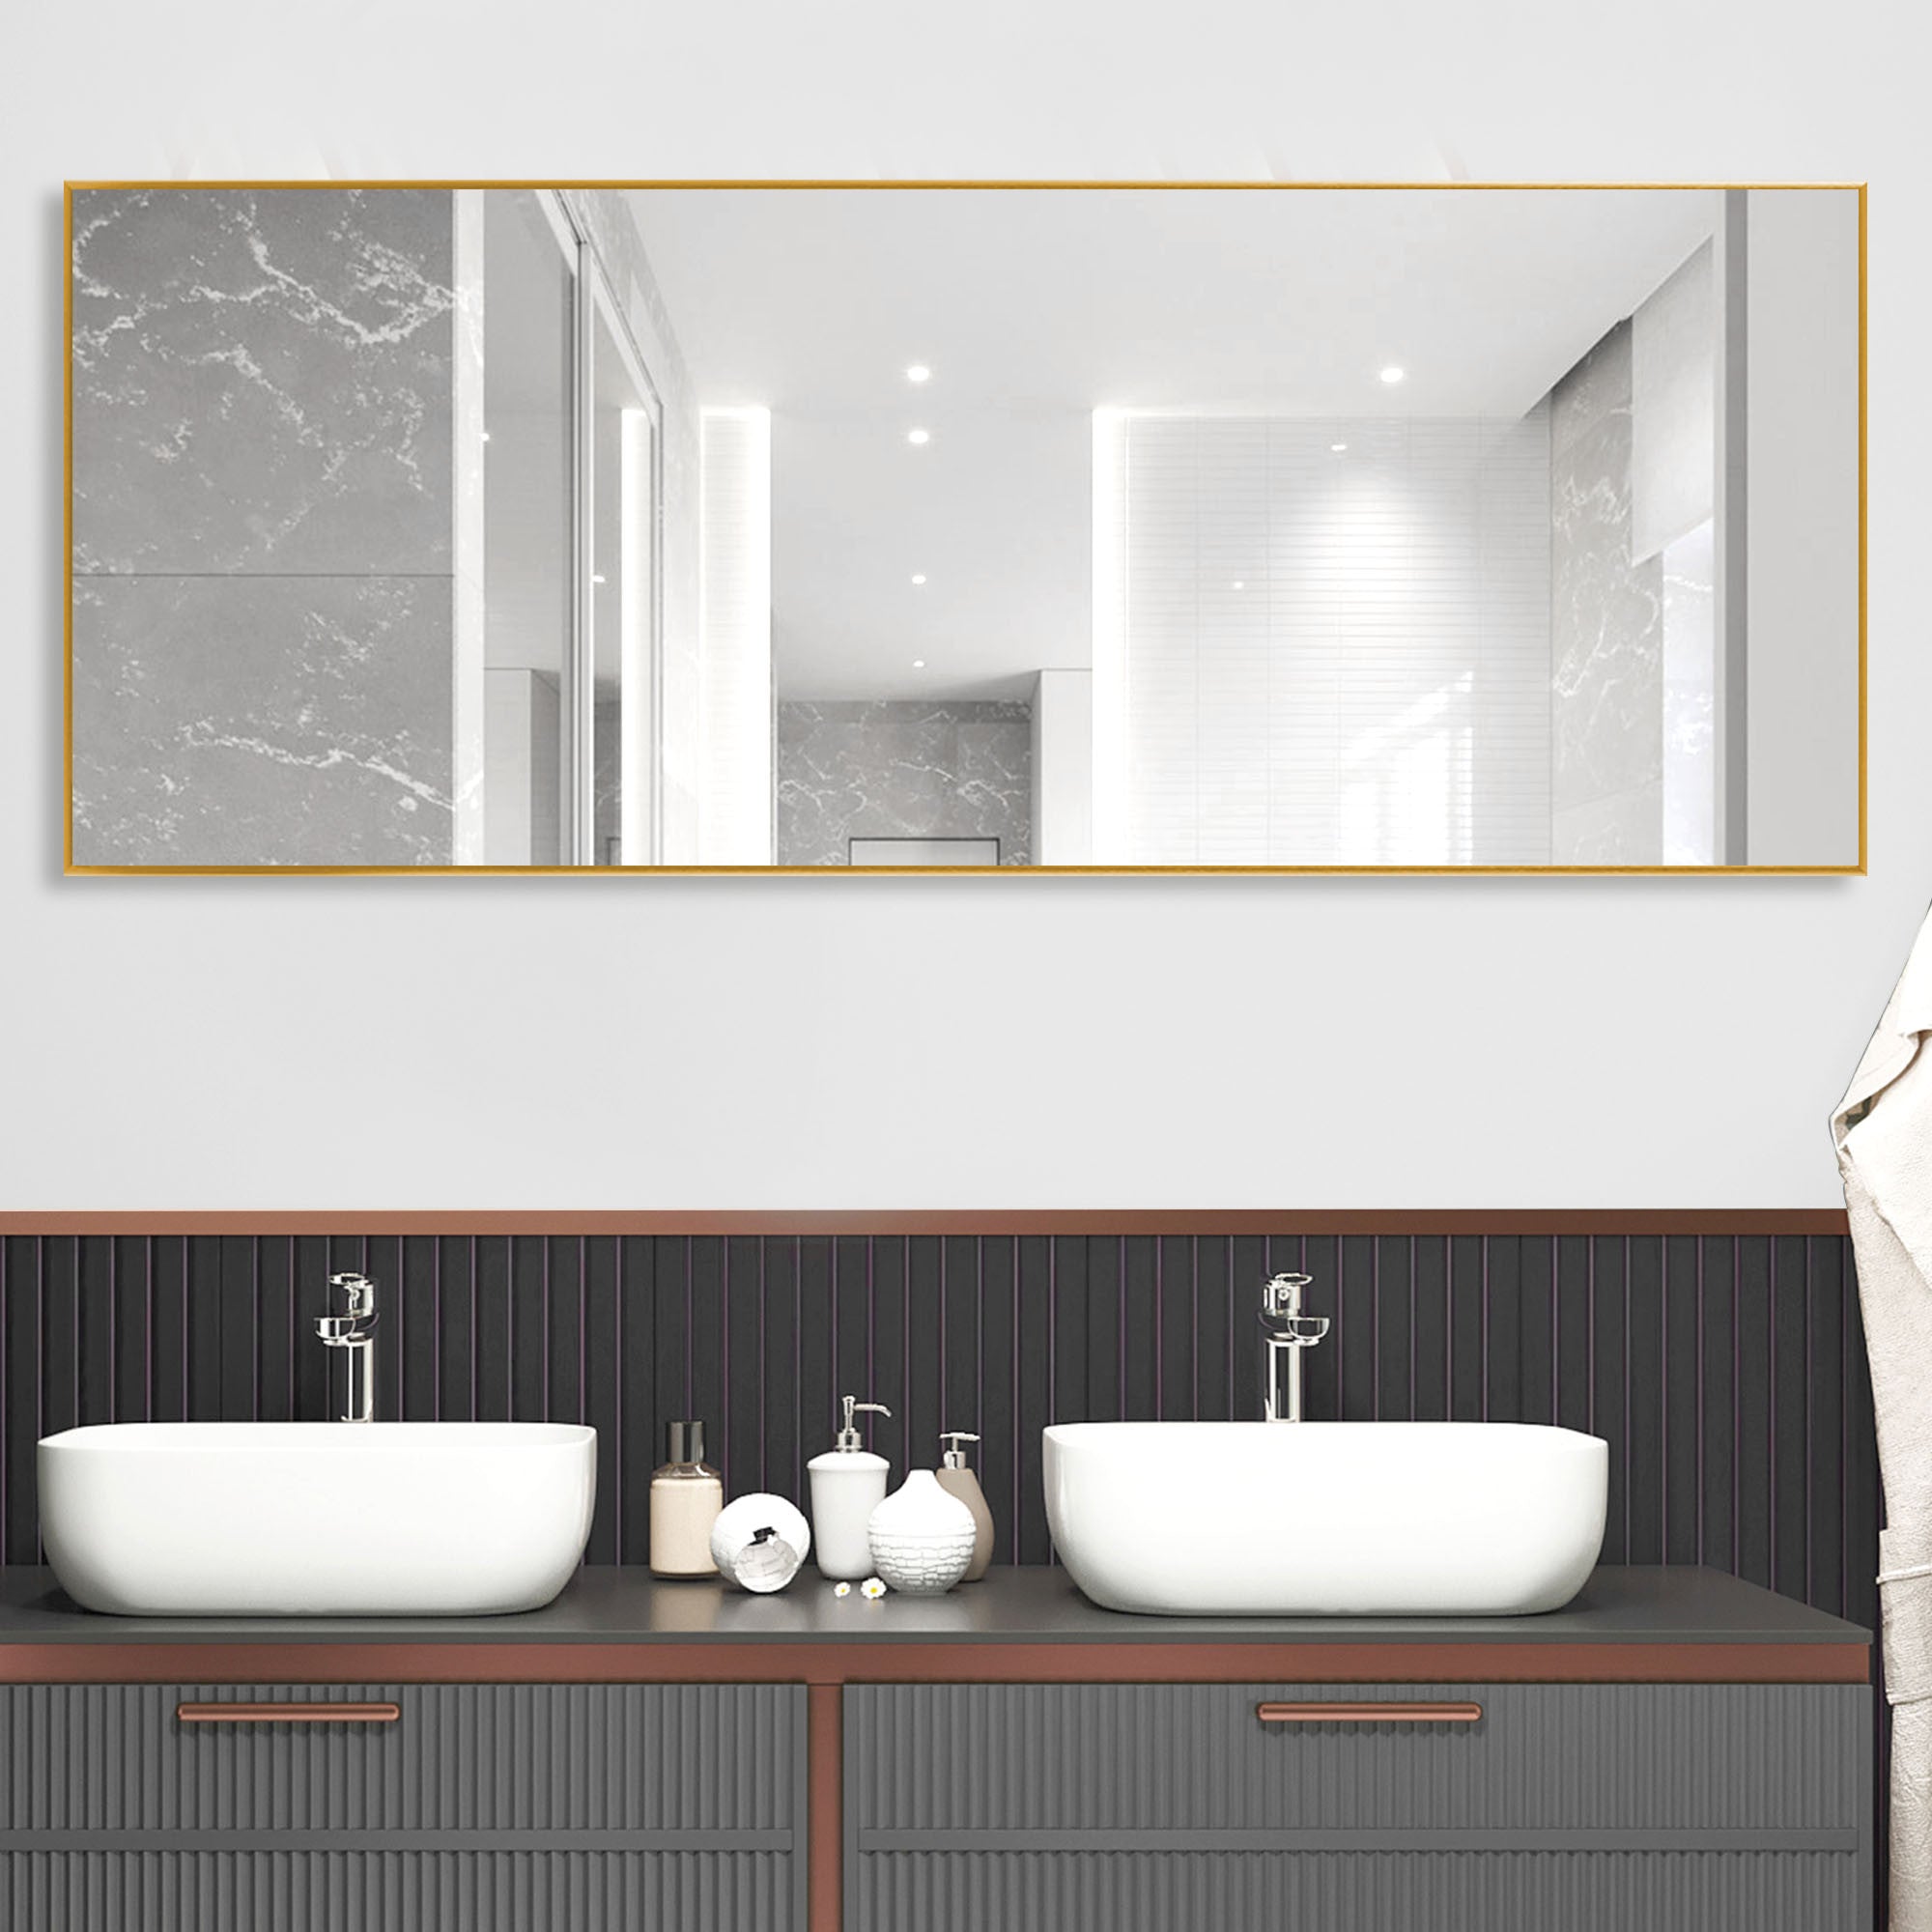 Narrow Minimal Gold Full-length Floor Mirror With Standing